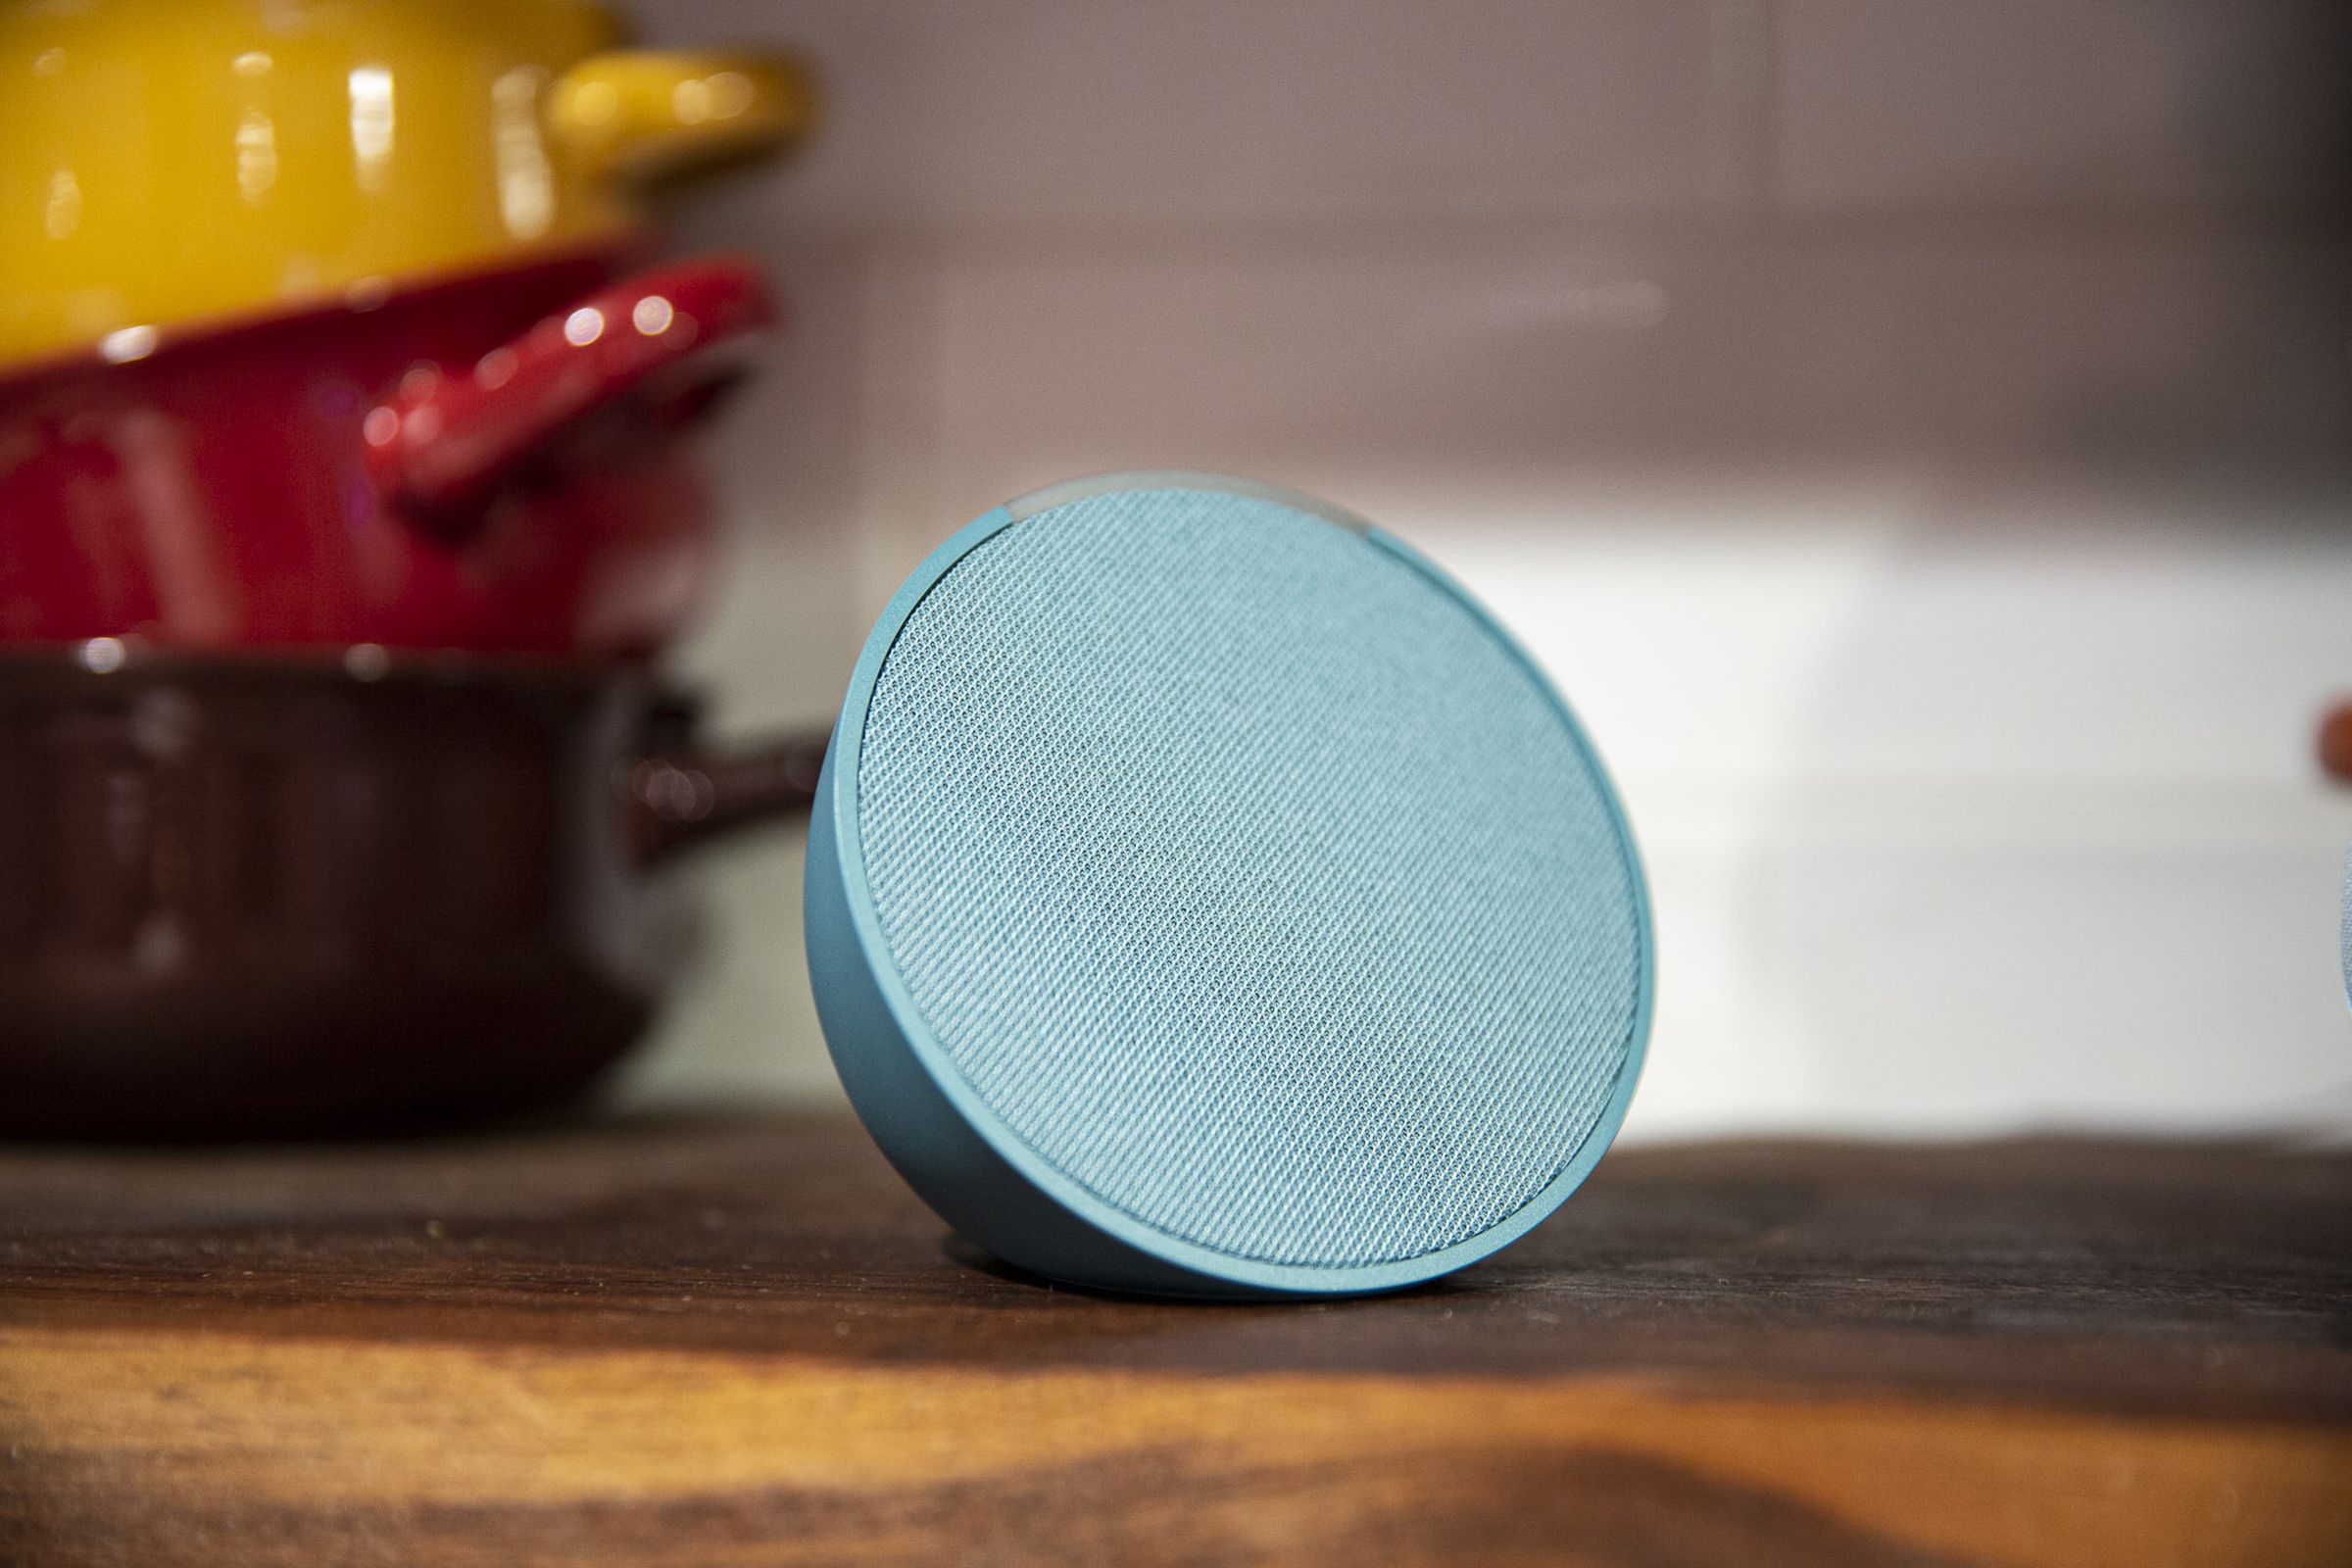 Amazon’s Echo Pop speaker comes in a host of fun colors, including an attractive teal option.